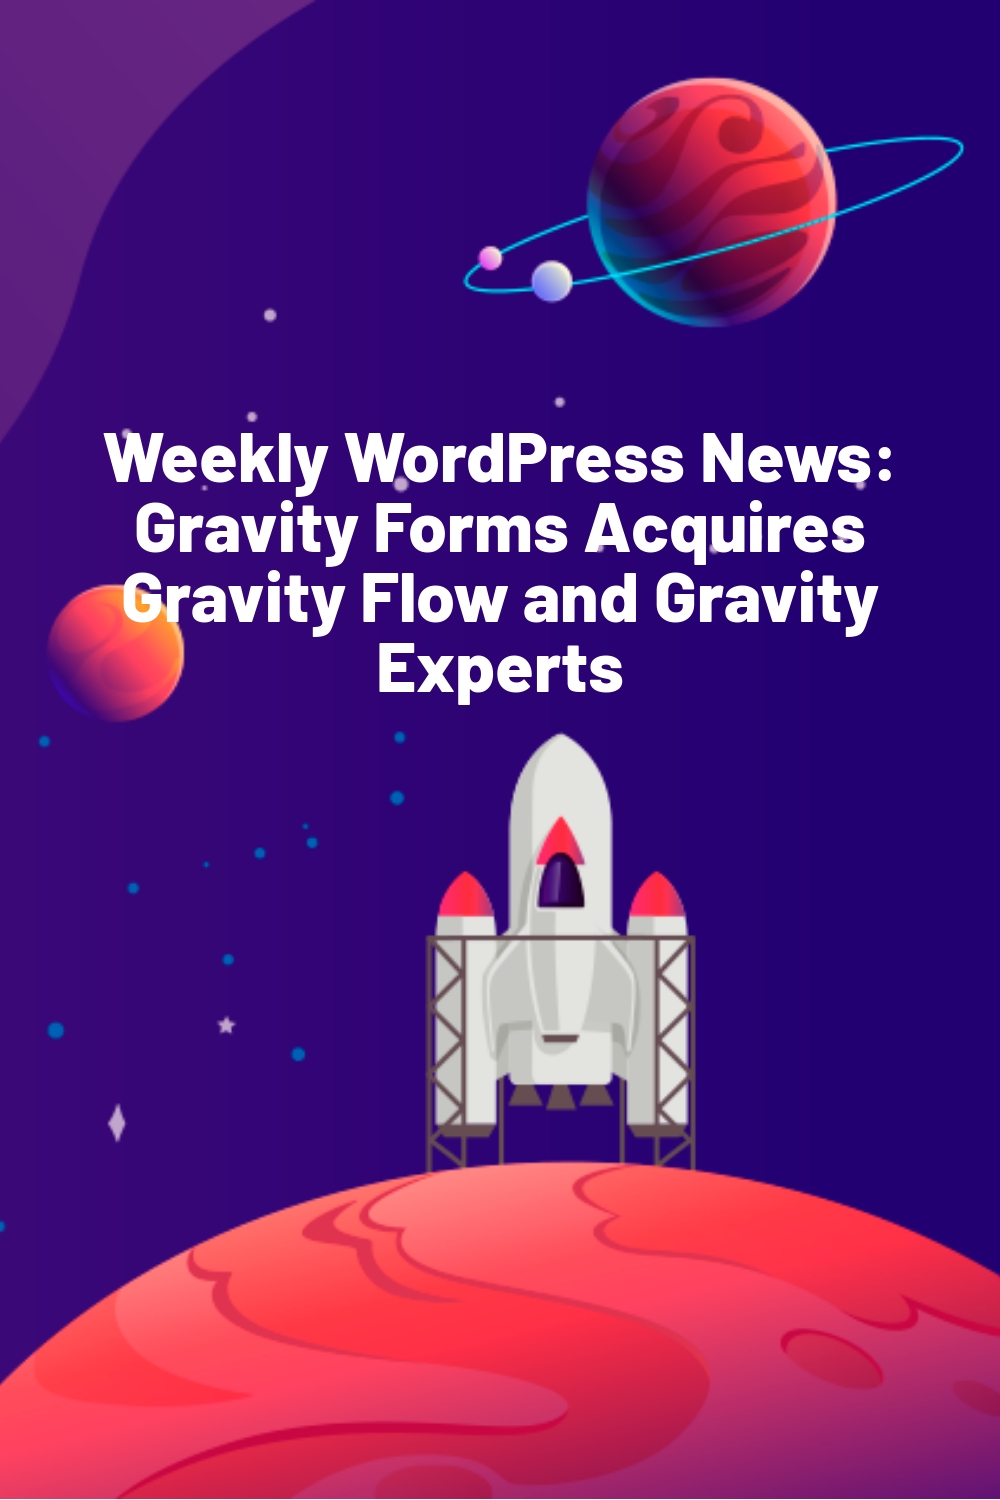 Weekly WordPress News:  Gravity Forms Acquires Gravity Flow and Gravity Experts